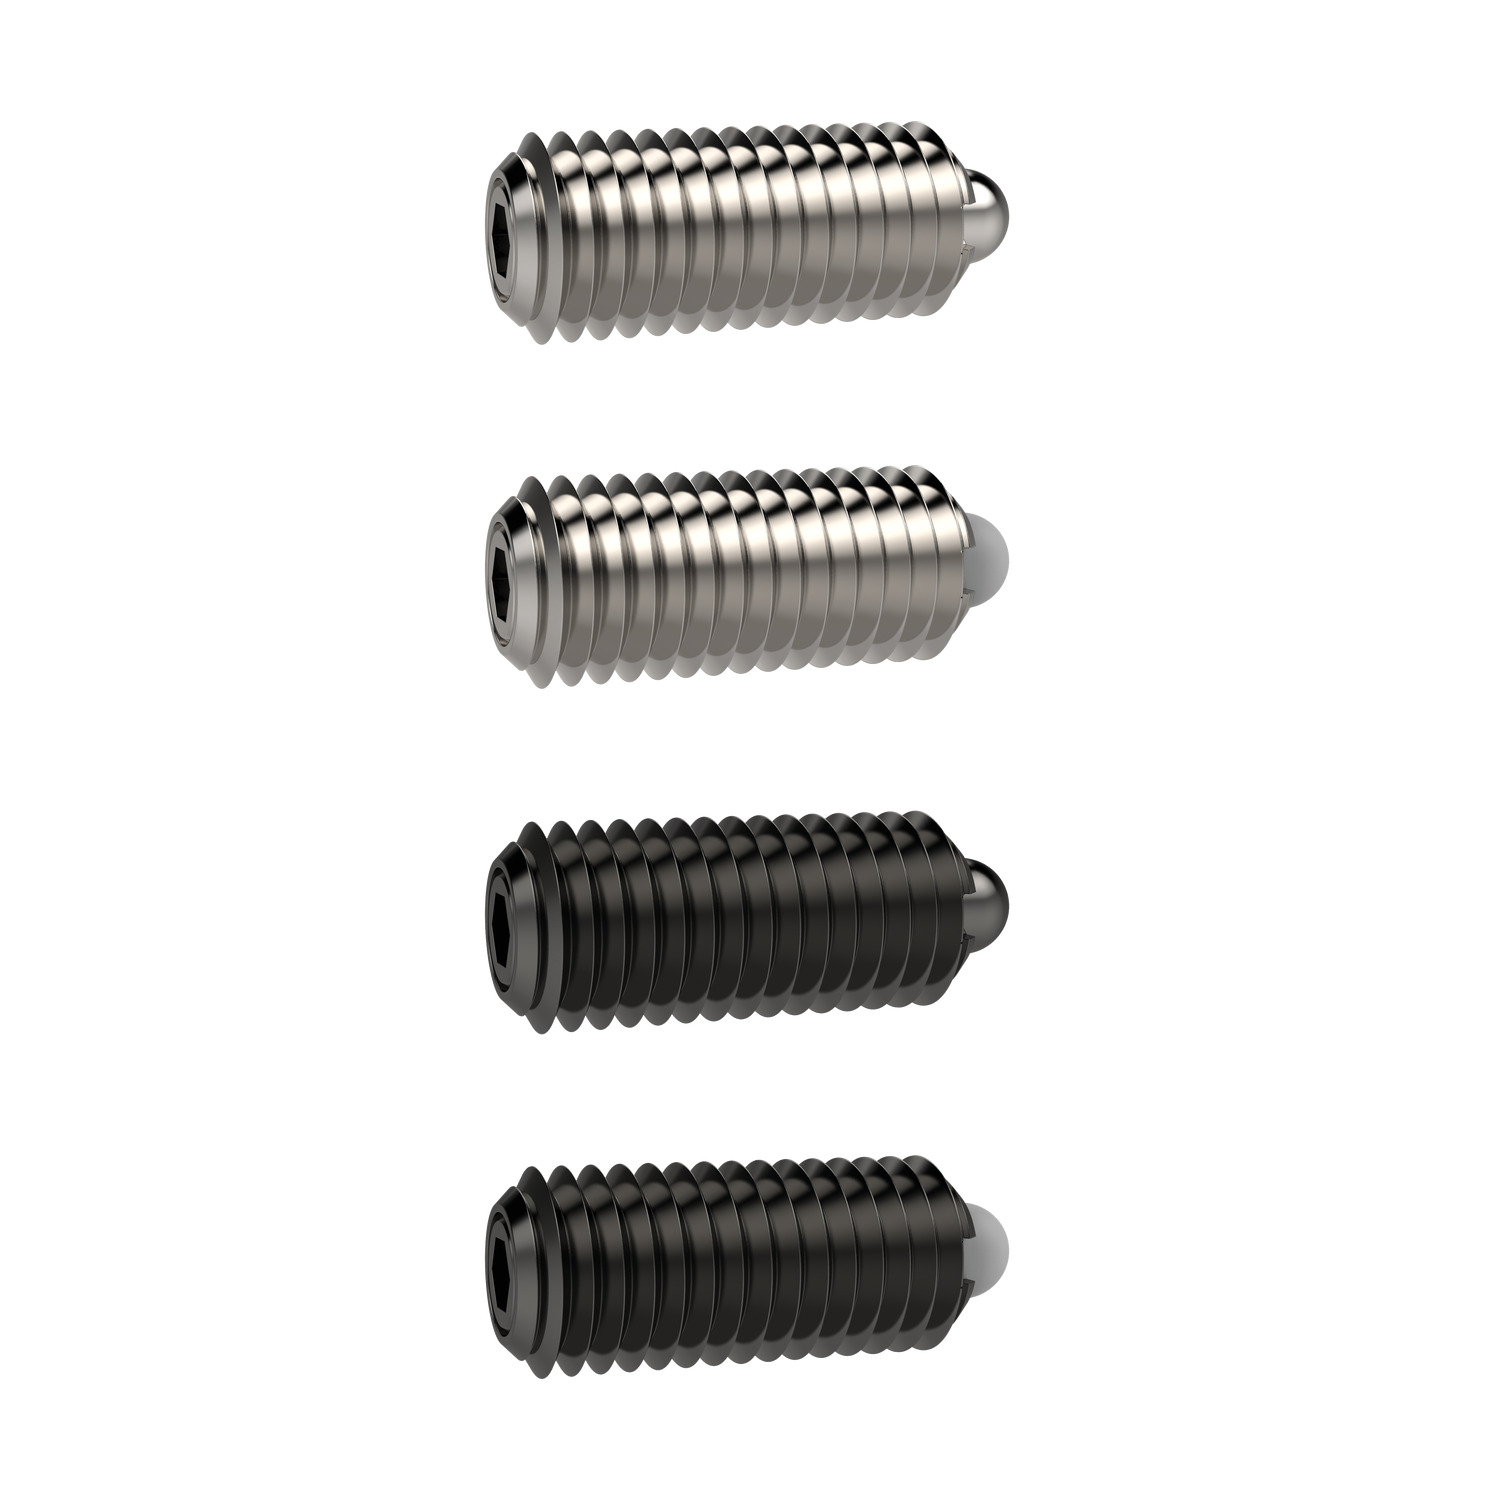 Spring Plungers Threaded body with pin end and hex socket made of stainless steel. Spring-loaded, these plungers are used for location, applying pressure or lifting off applications.